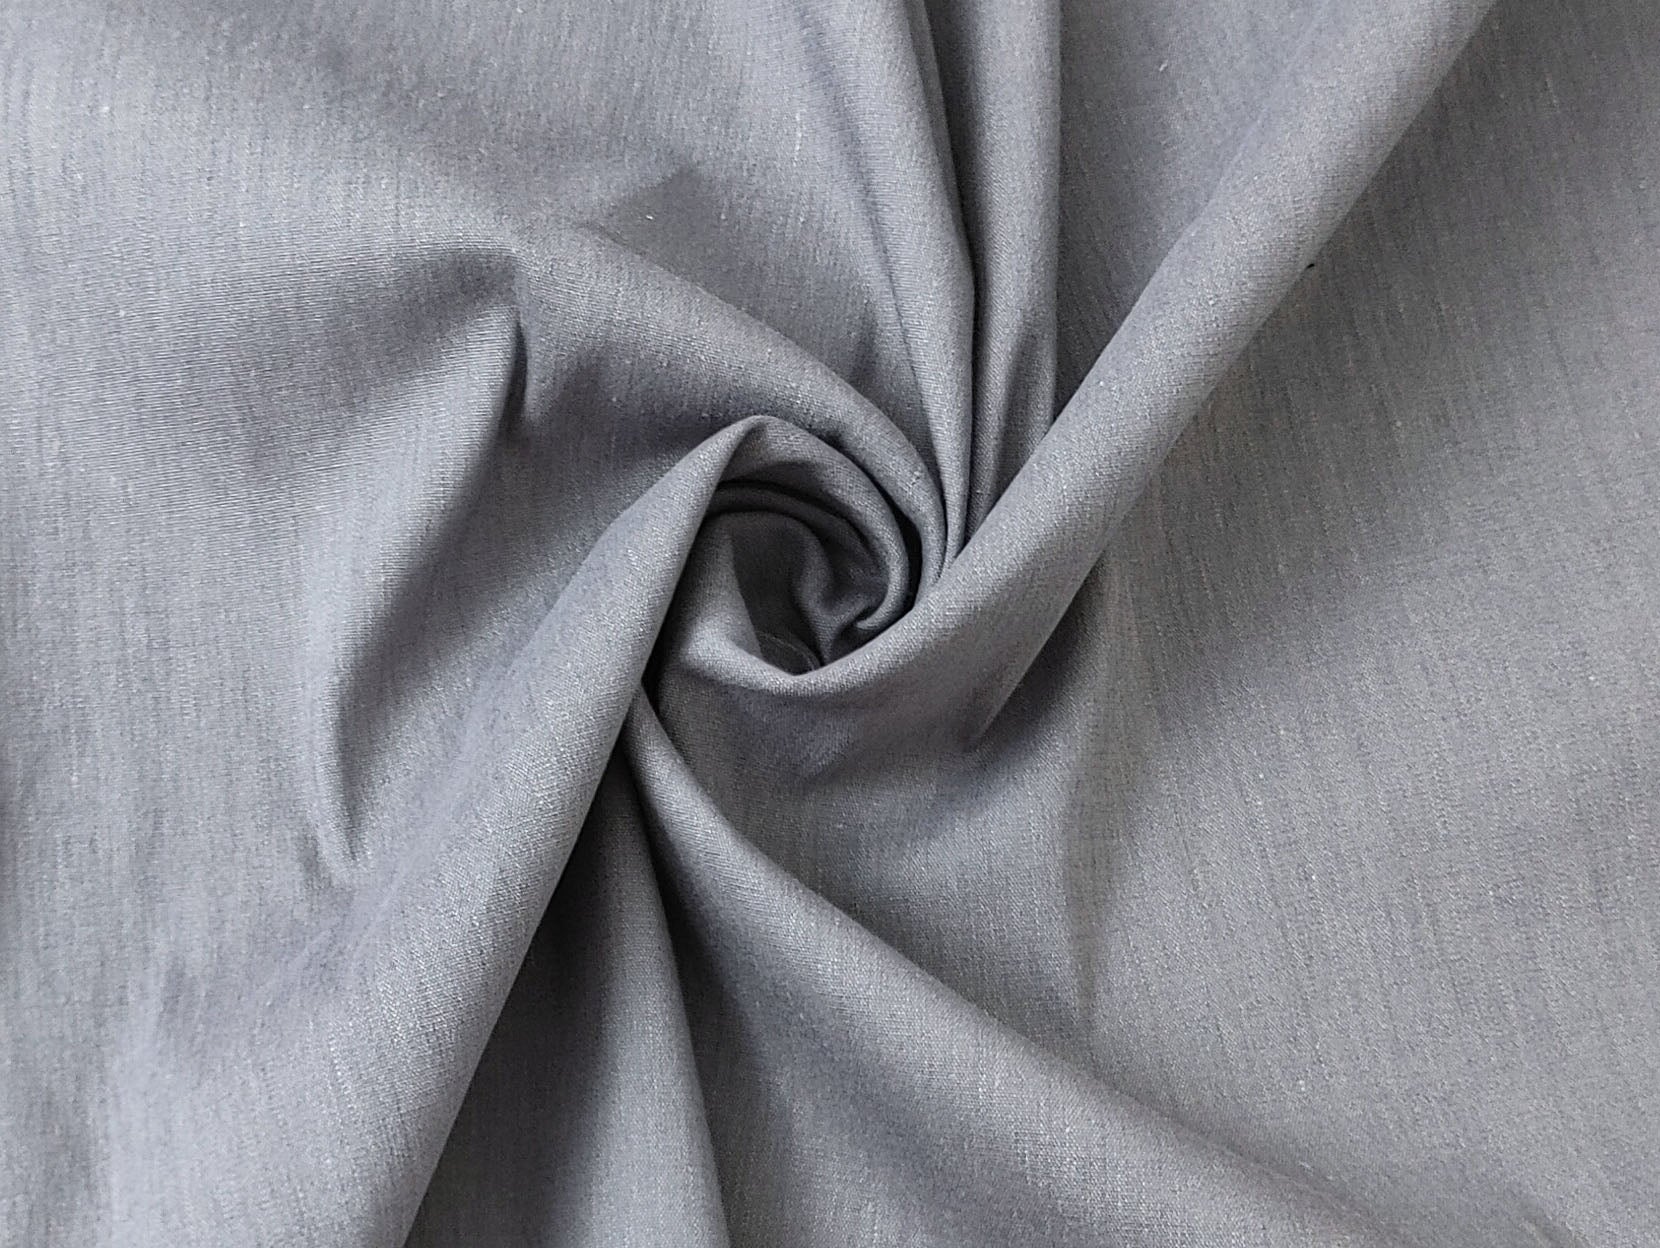 Donna Linen - High Density Linen Rayon Stretch Fabric 4025 4024 5982 4803 4579 4578 4023 3978 - The Linen Lab - Gray